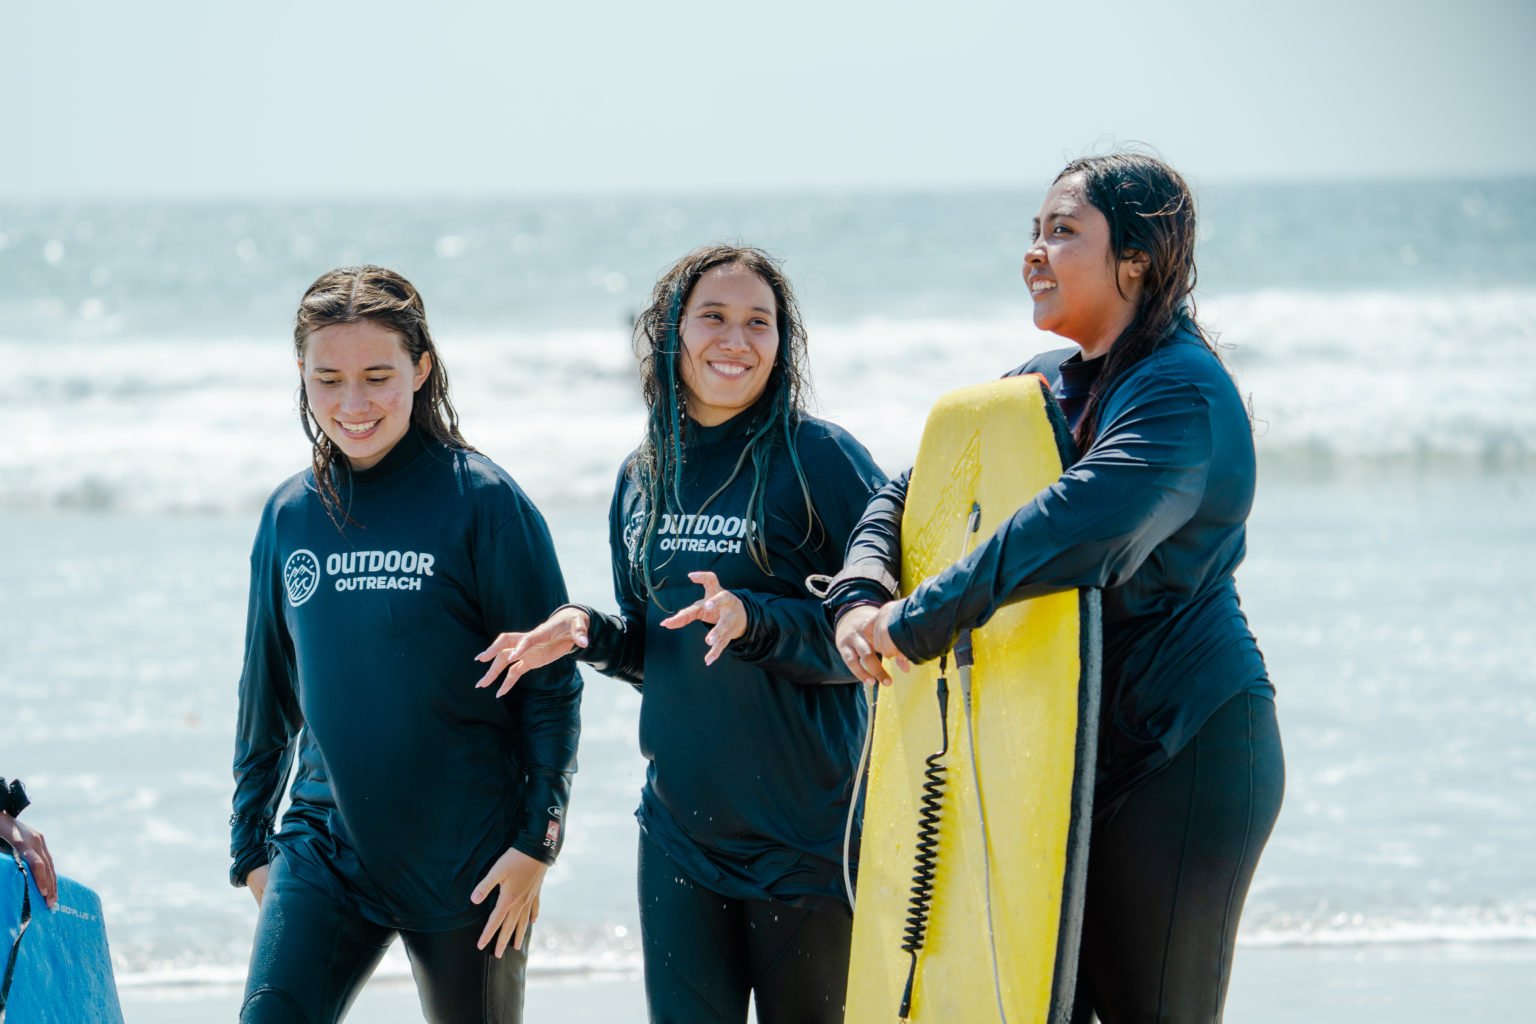 group-of-young-female-surfers-wearing-wetsuits-with-the-outdoor-outreach-logo-on-them.jpg